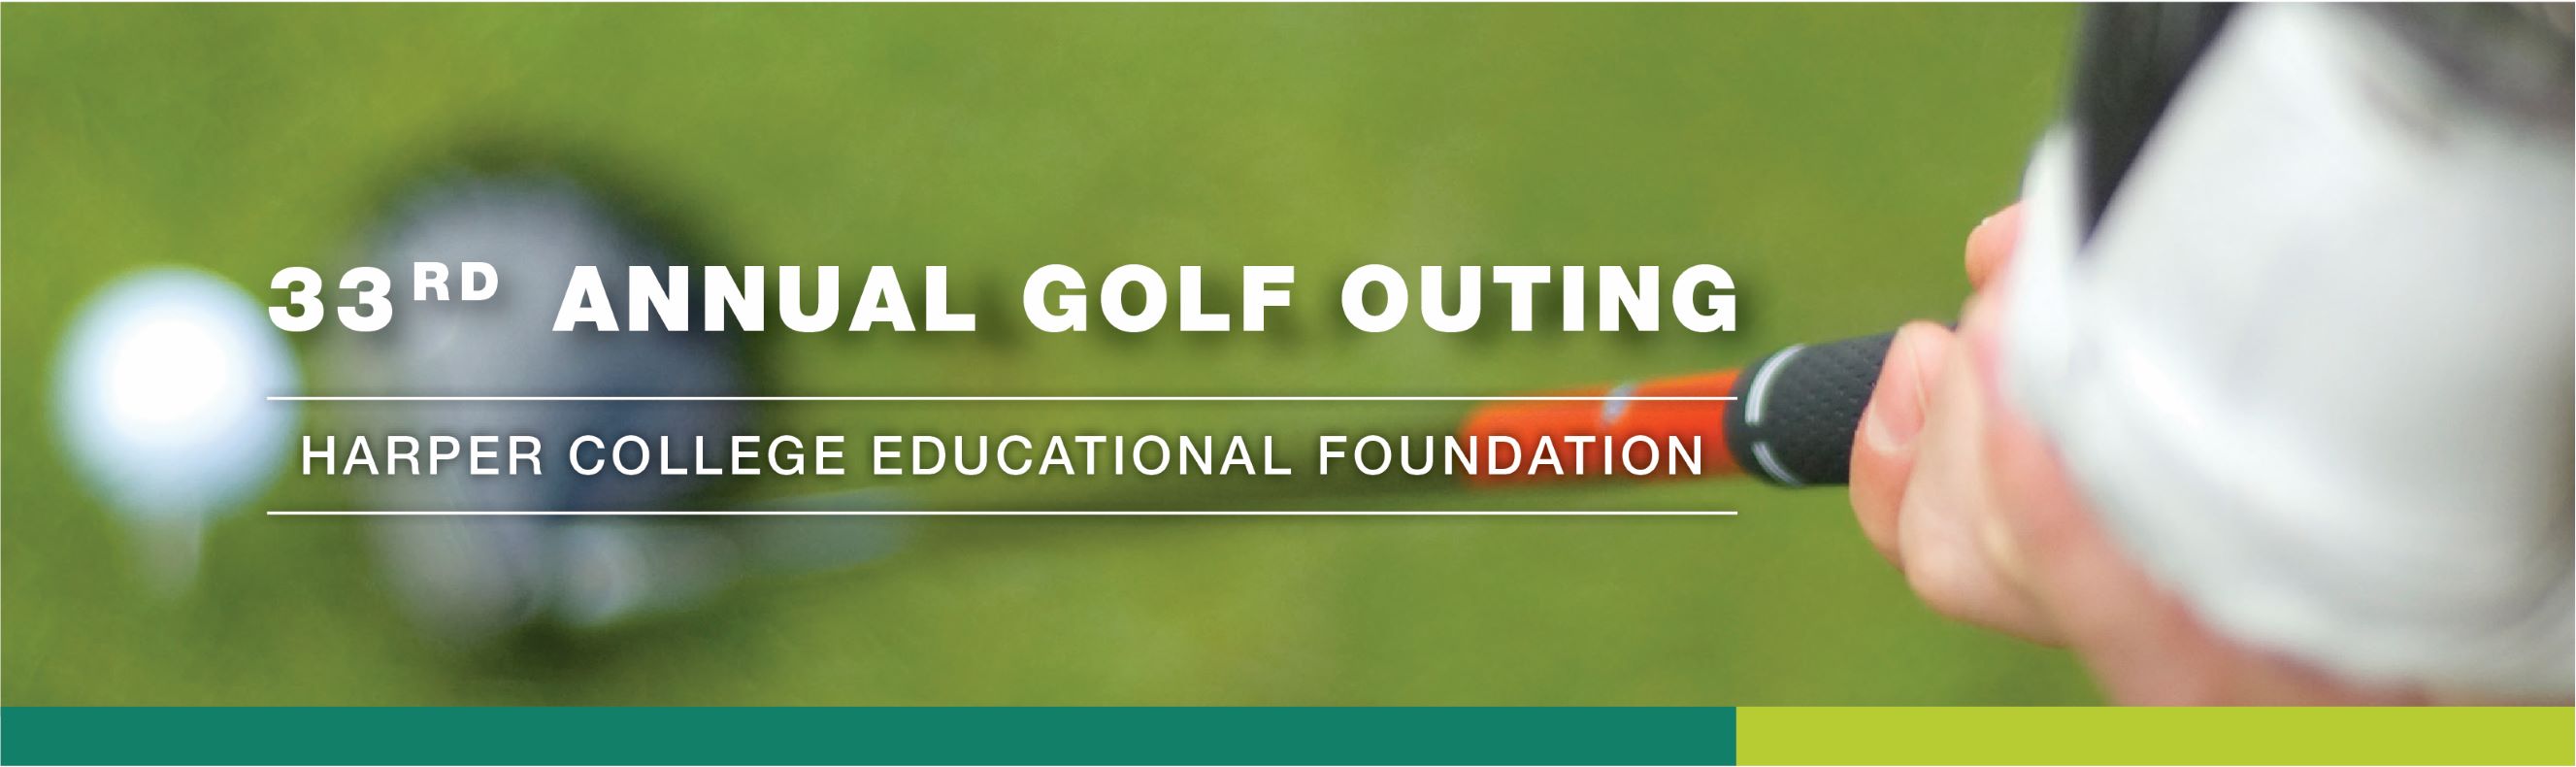 33rd Annual Harper College Educational Foundation Golf Outing